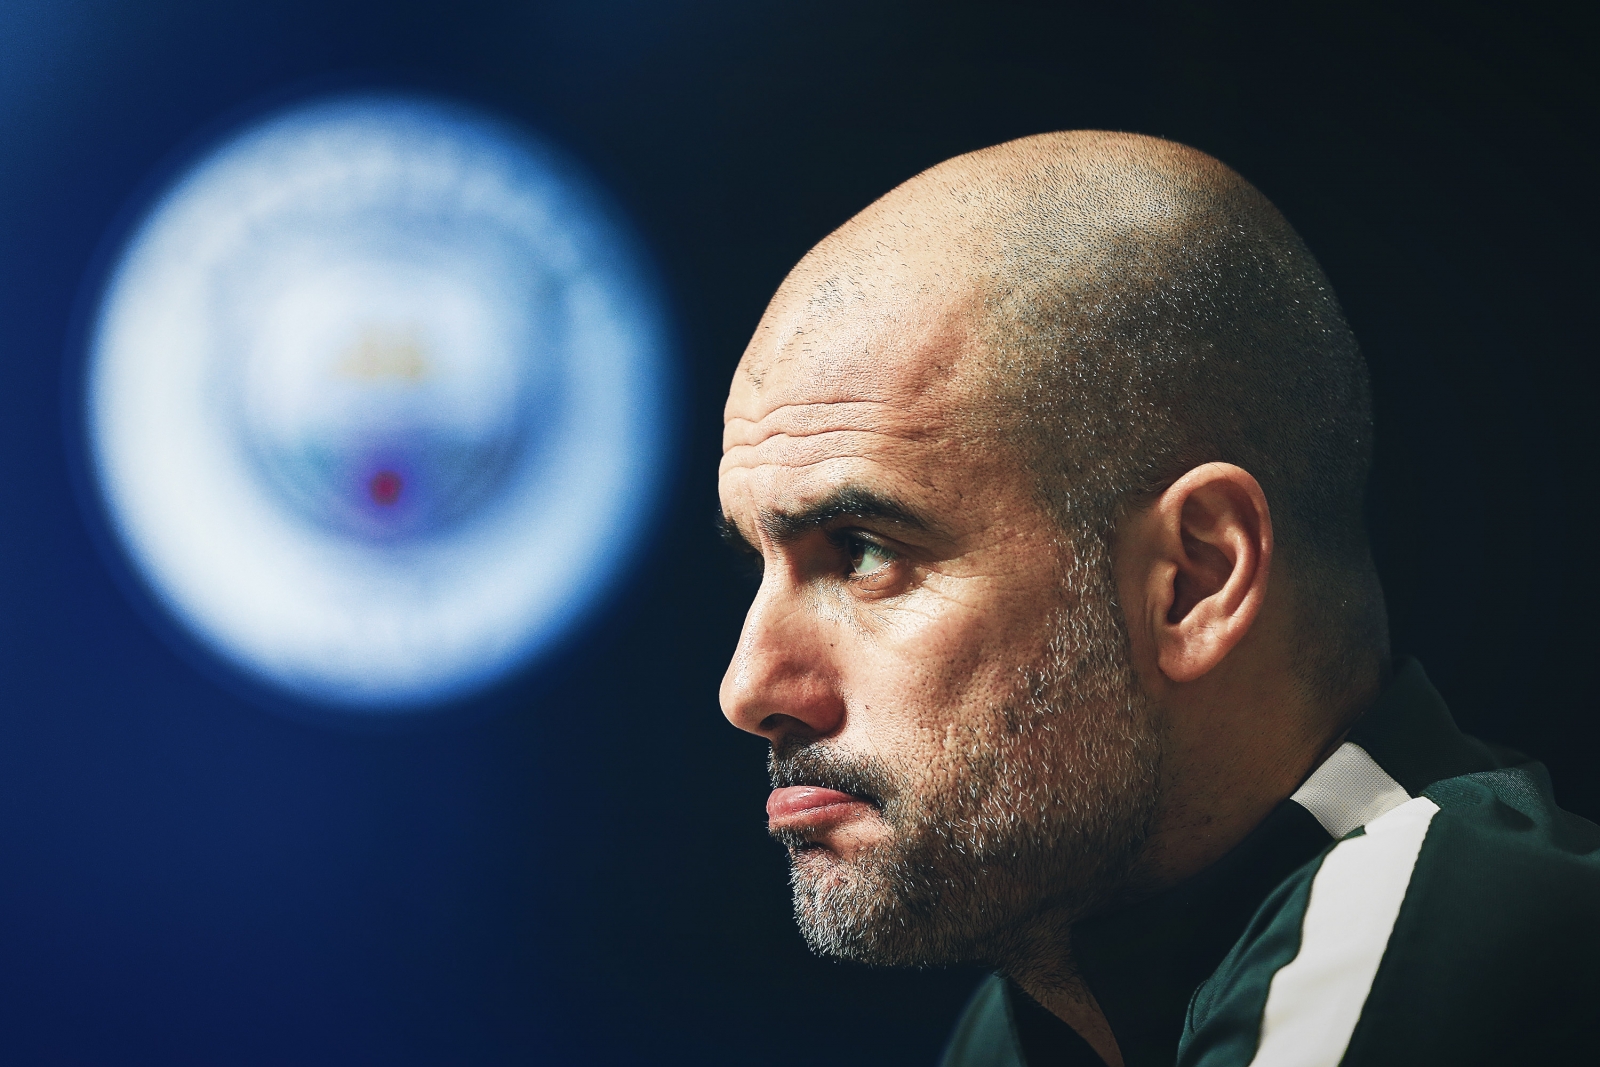 'I'm sure he will stay and keep winning trophies': Pablo Zabaleta backs Pep Guardiola to remain at Manchester City despite links with Juventus - Bóng Đá